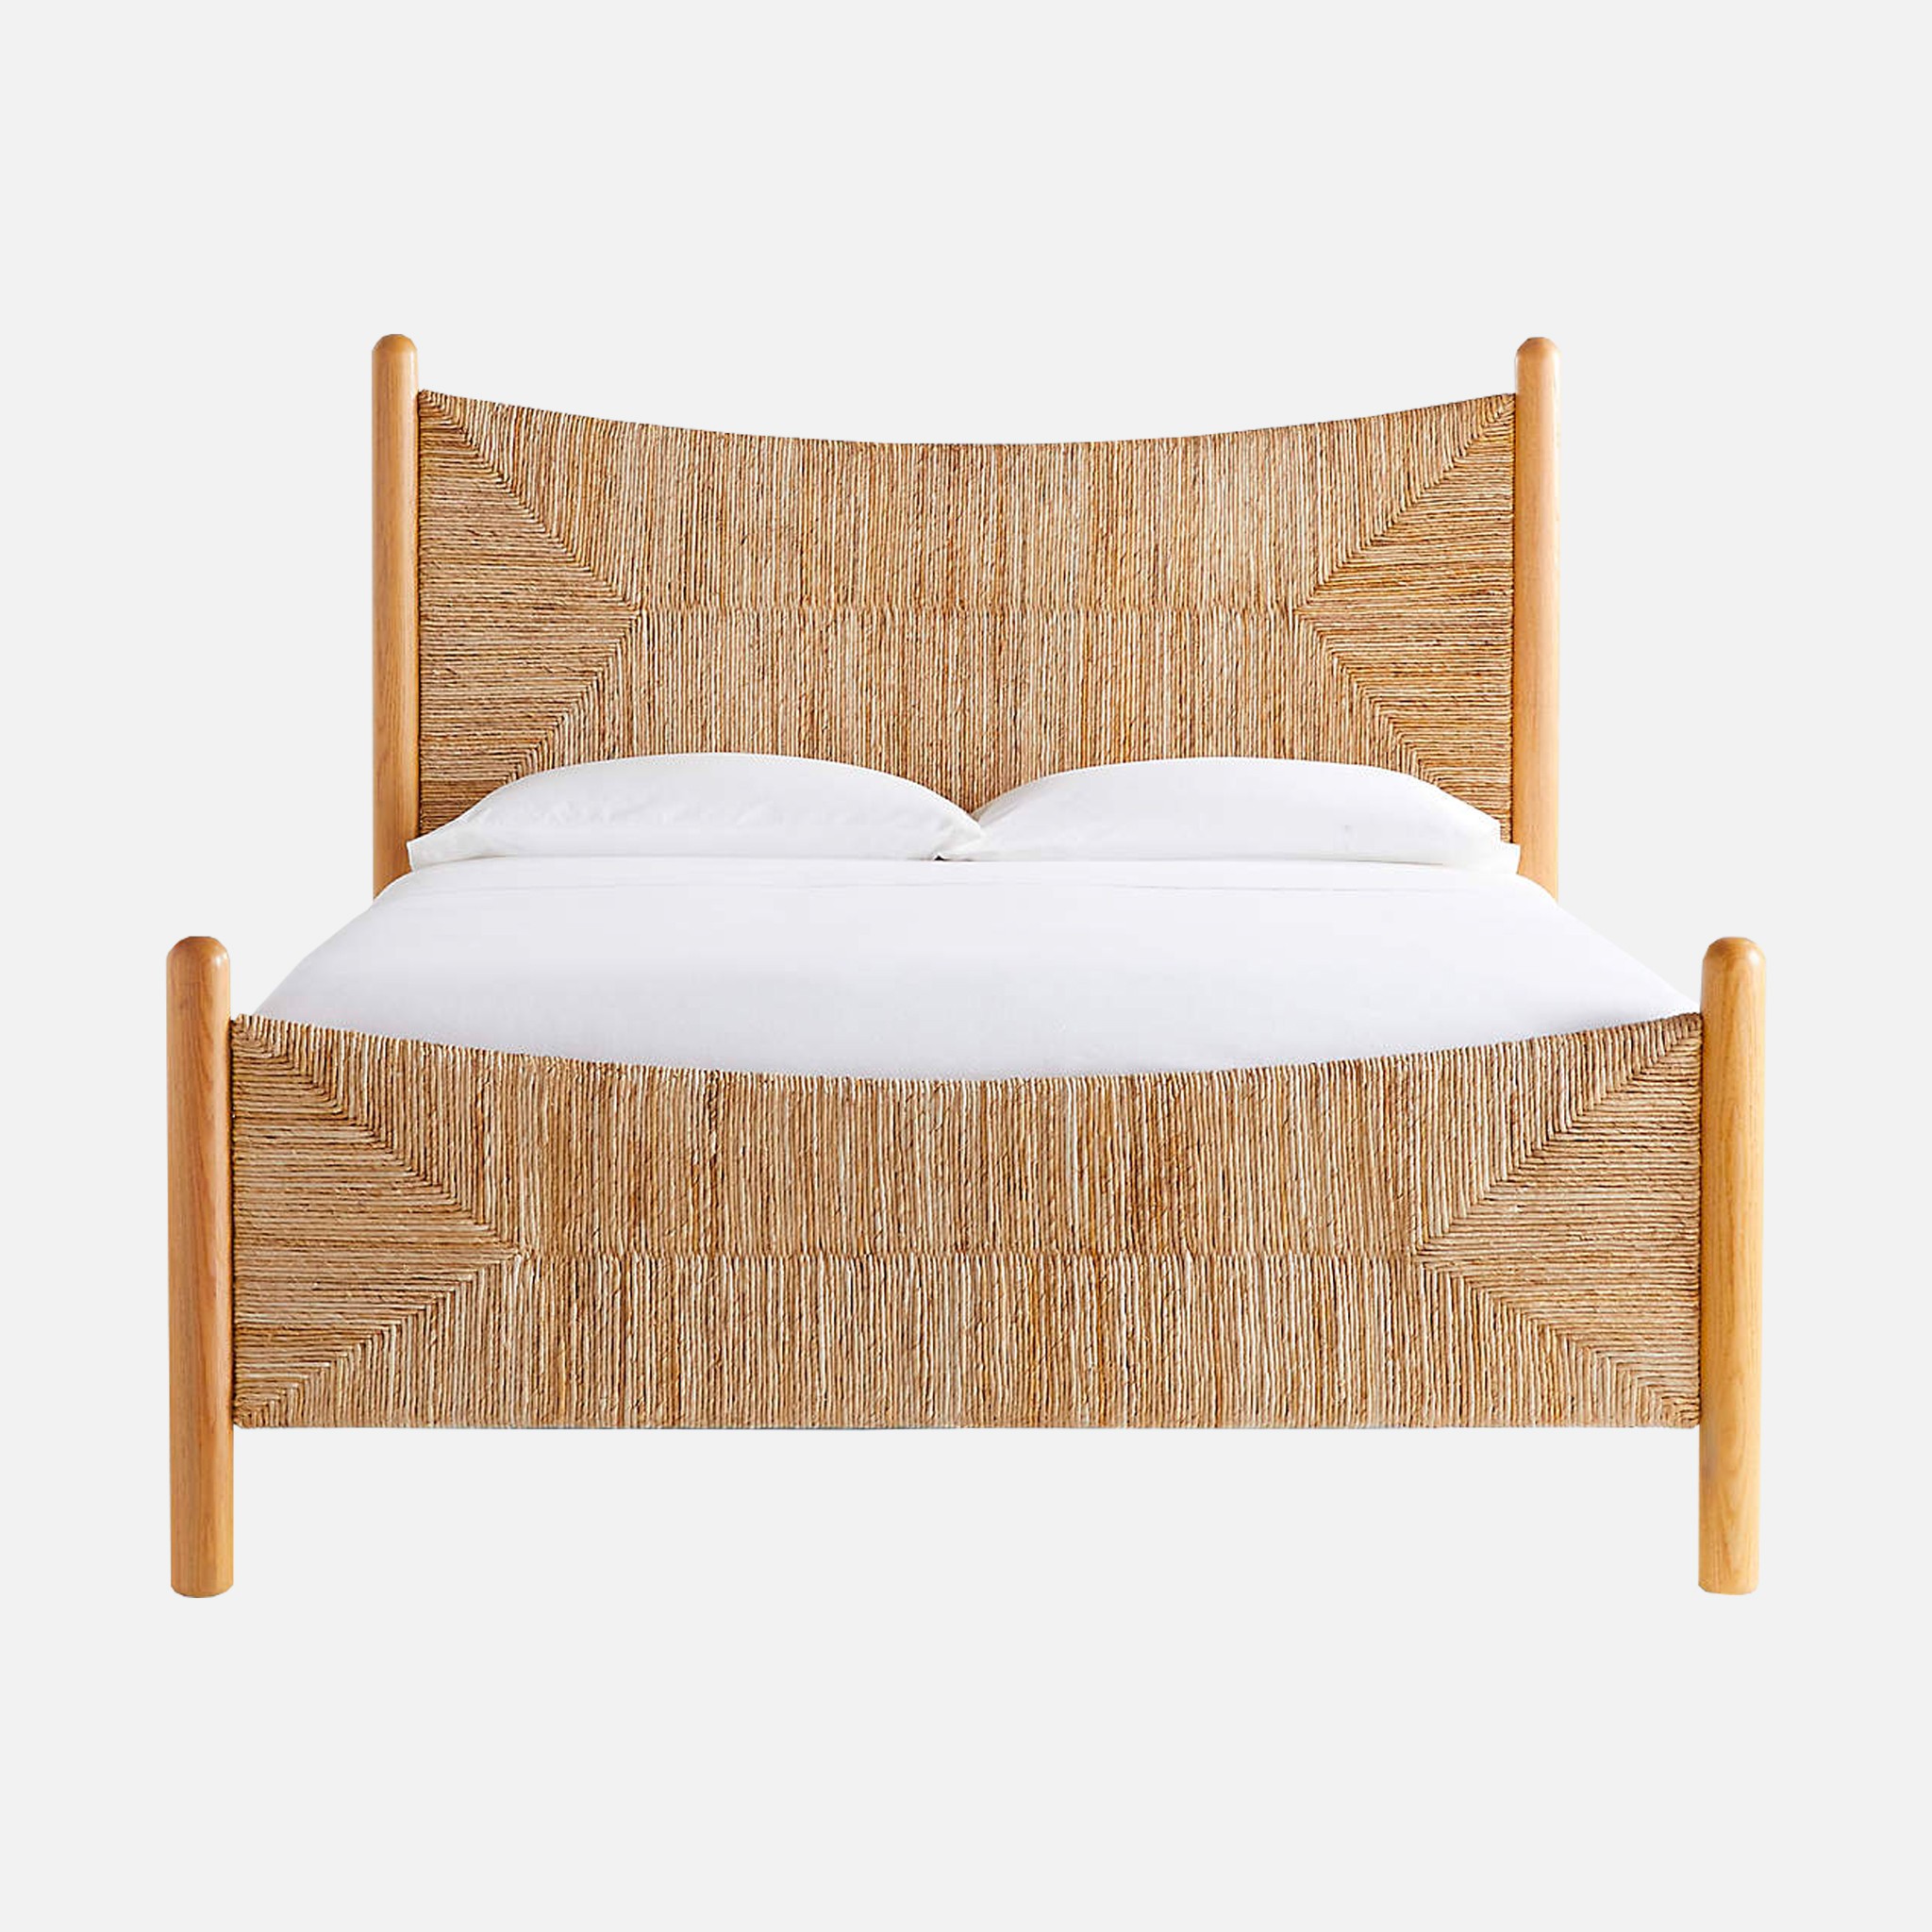 The image of an Crate & Barrel Rambler Rush Woven Bed product